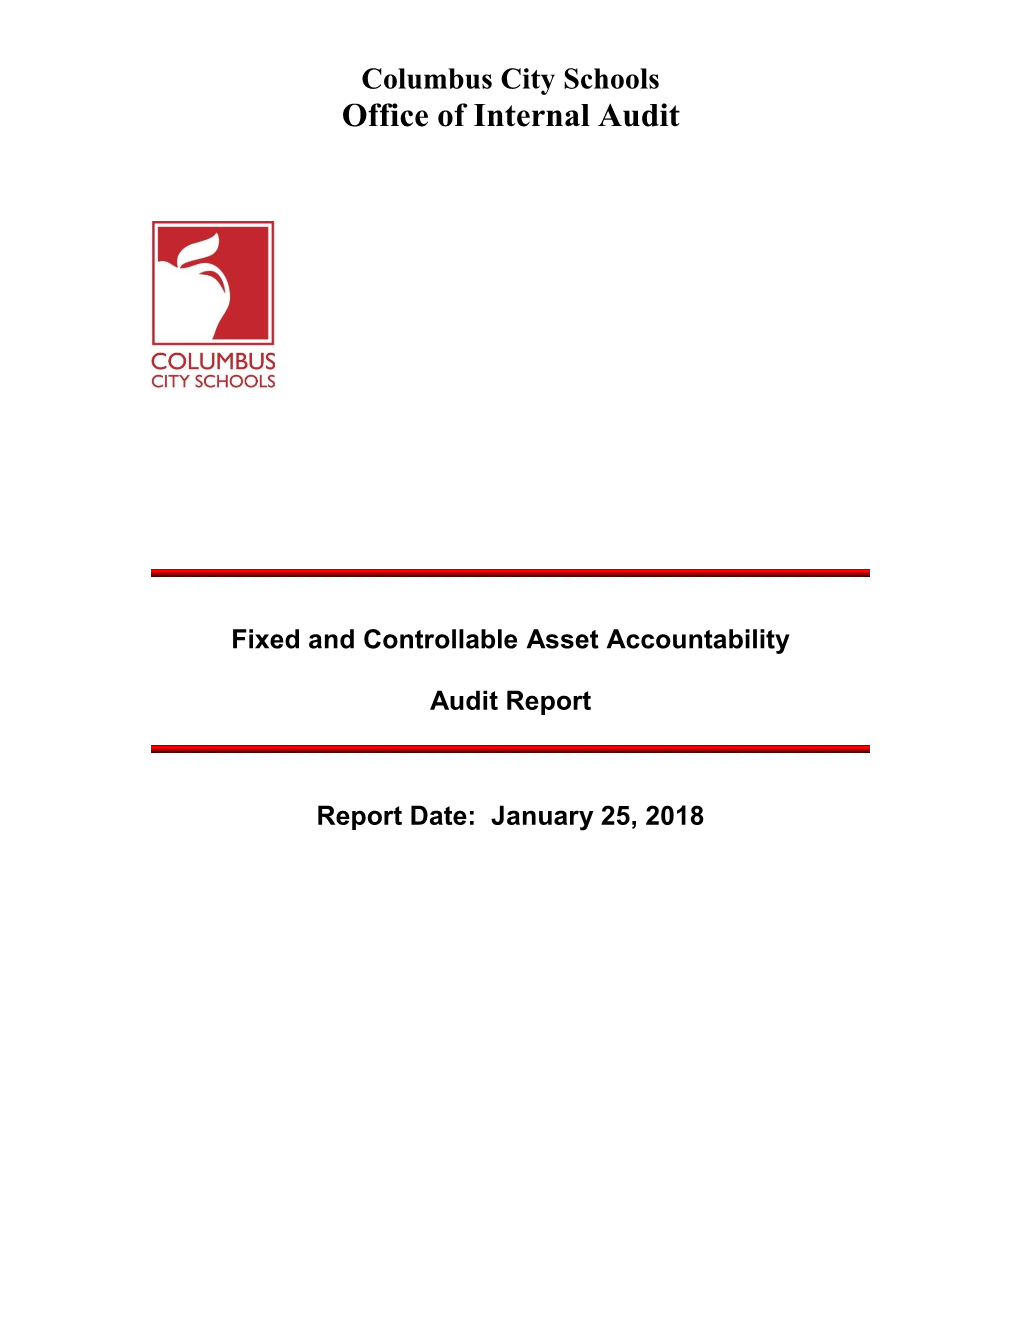 Fixed & Controllable Asset Audit Report